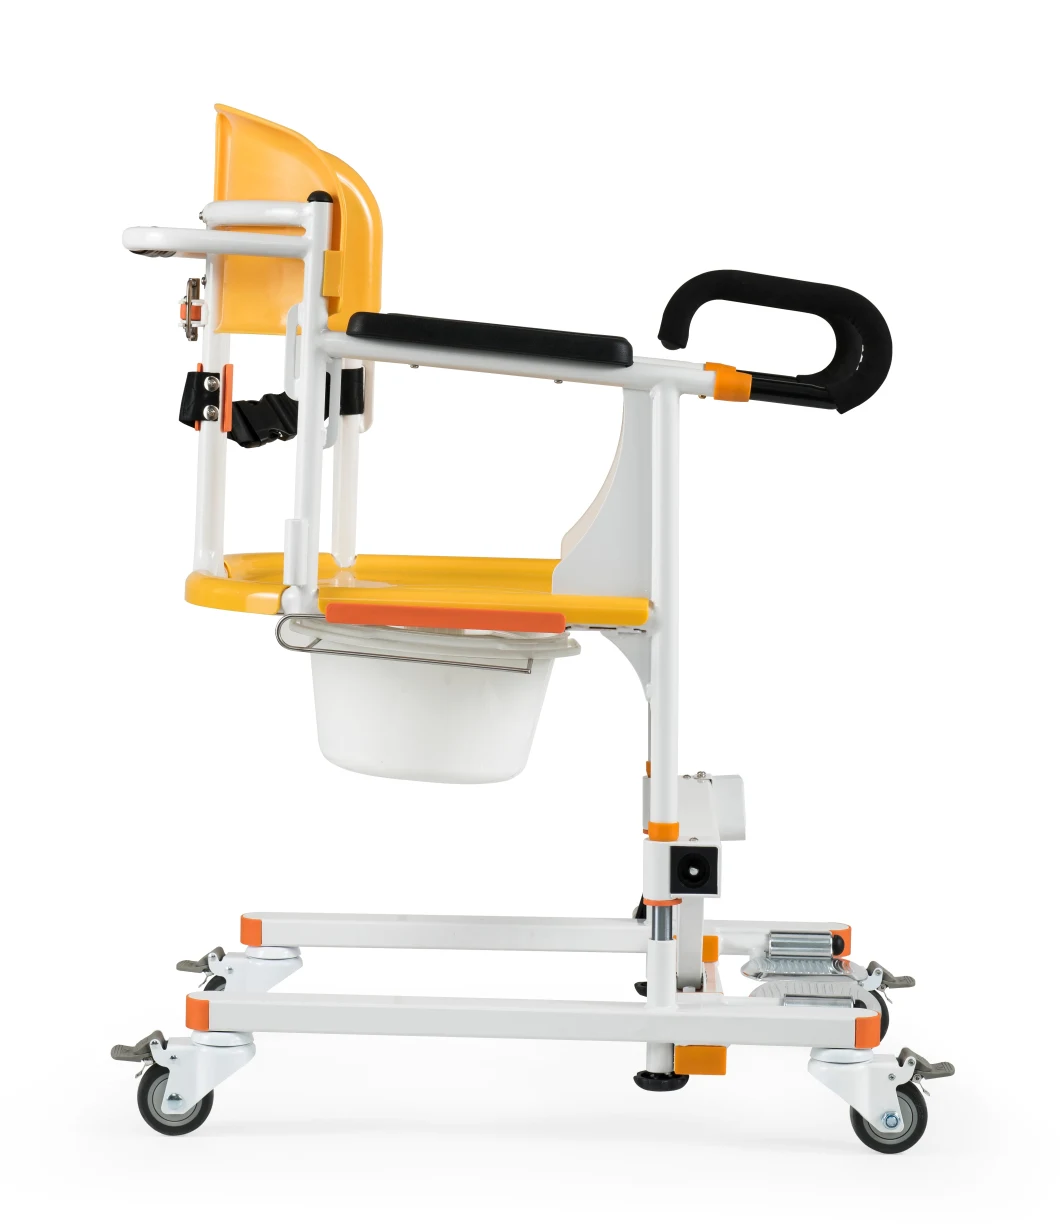 Medical Products Manual Patients Transfer Chair with Wheels Medical Shift Machine with Commode Toilet for Disabled Elderly